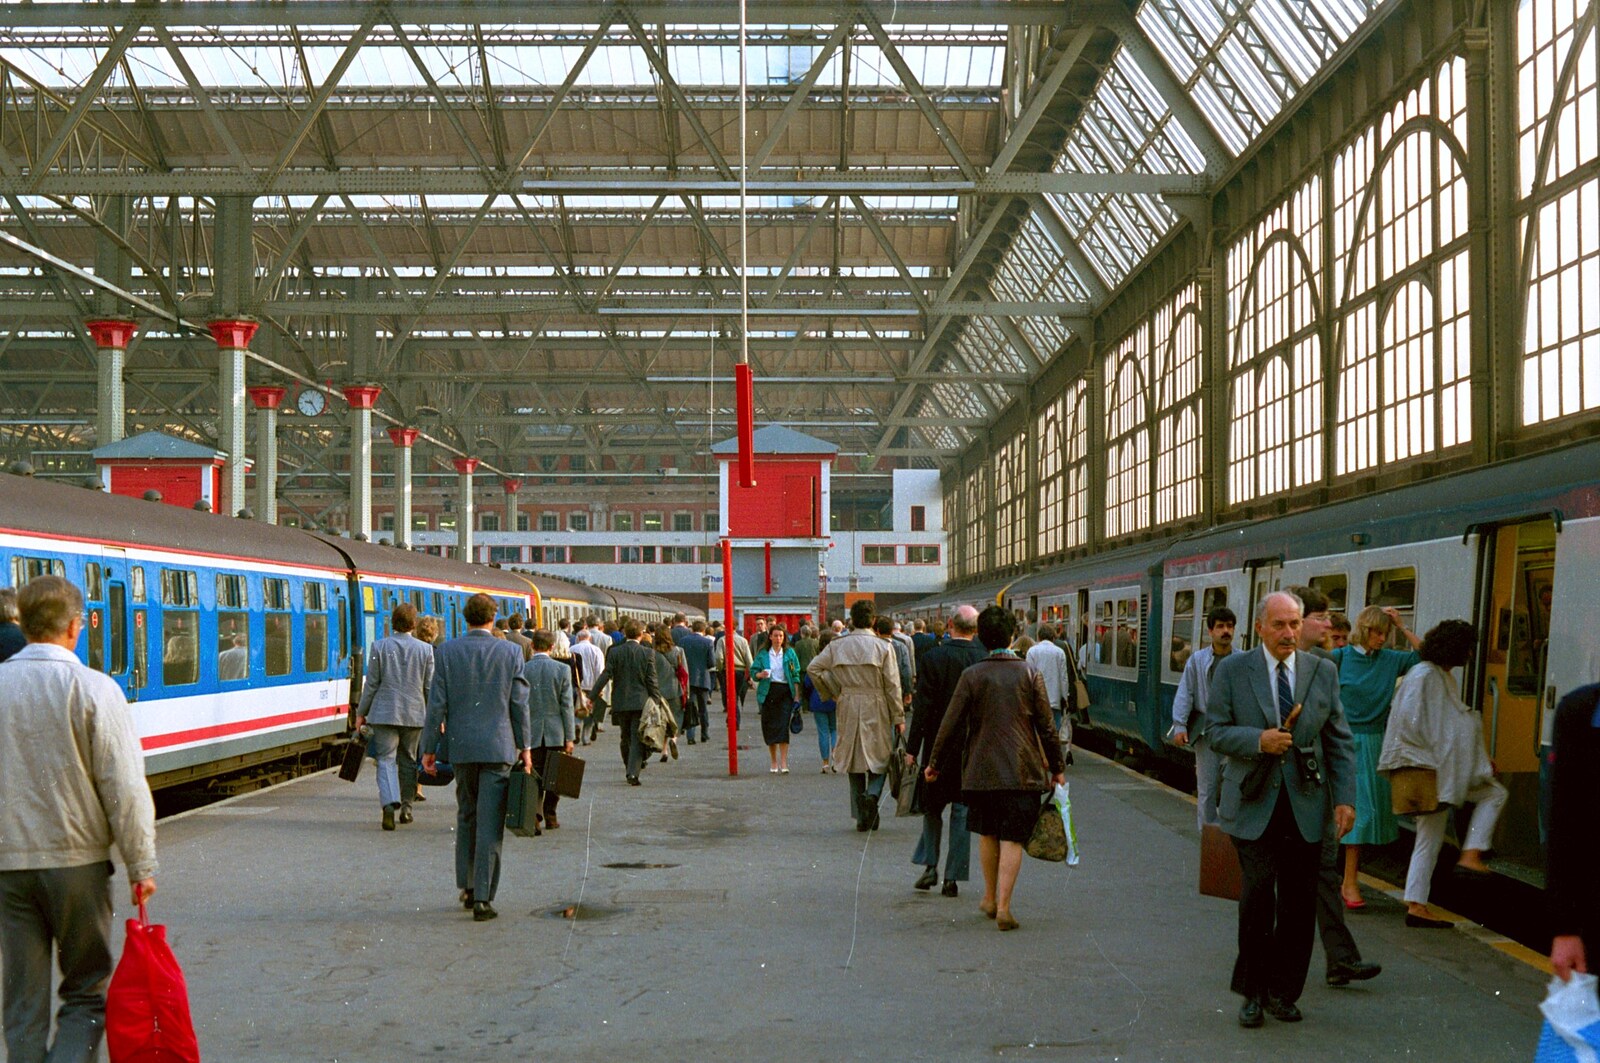 From Waterloo Station to Great Yarmouth, London and Norfolk - 20th September 1987: 9:25am, on Platform 2 at Waterloo Station, and the Class 438 4TC train (left) has just come in